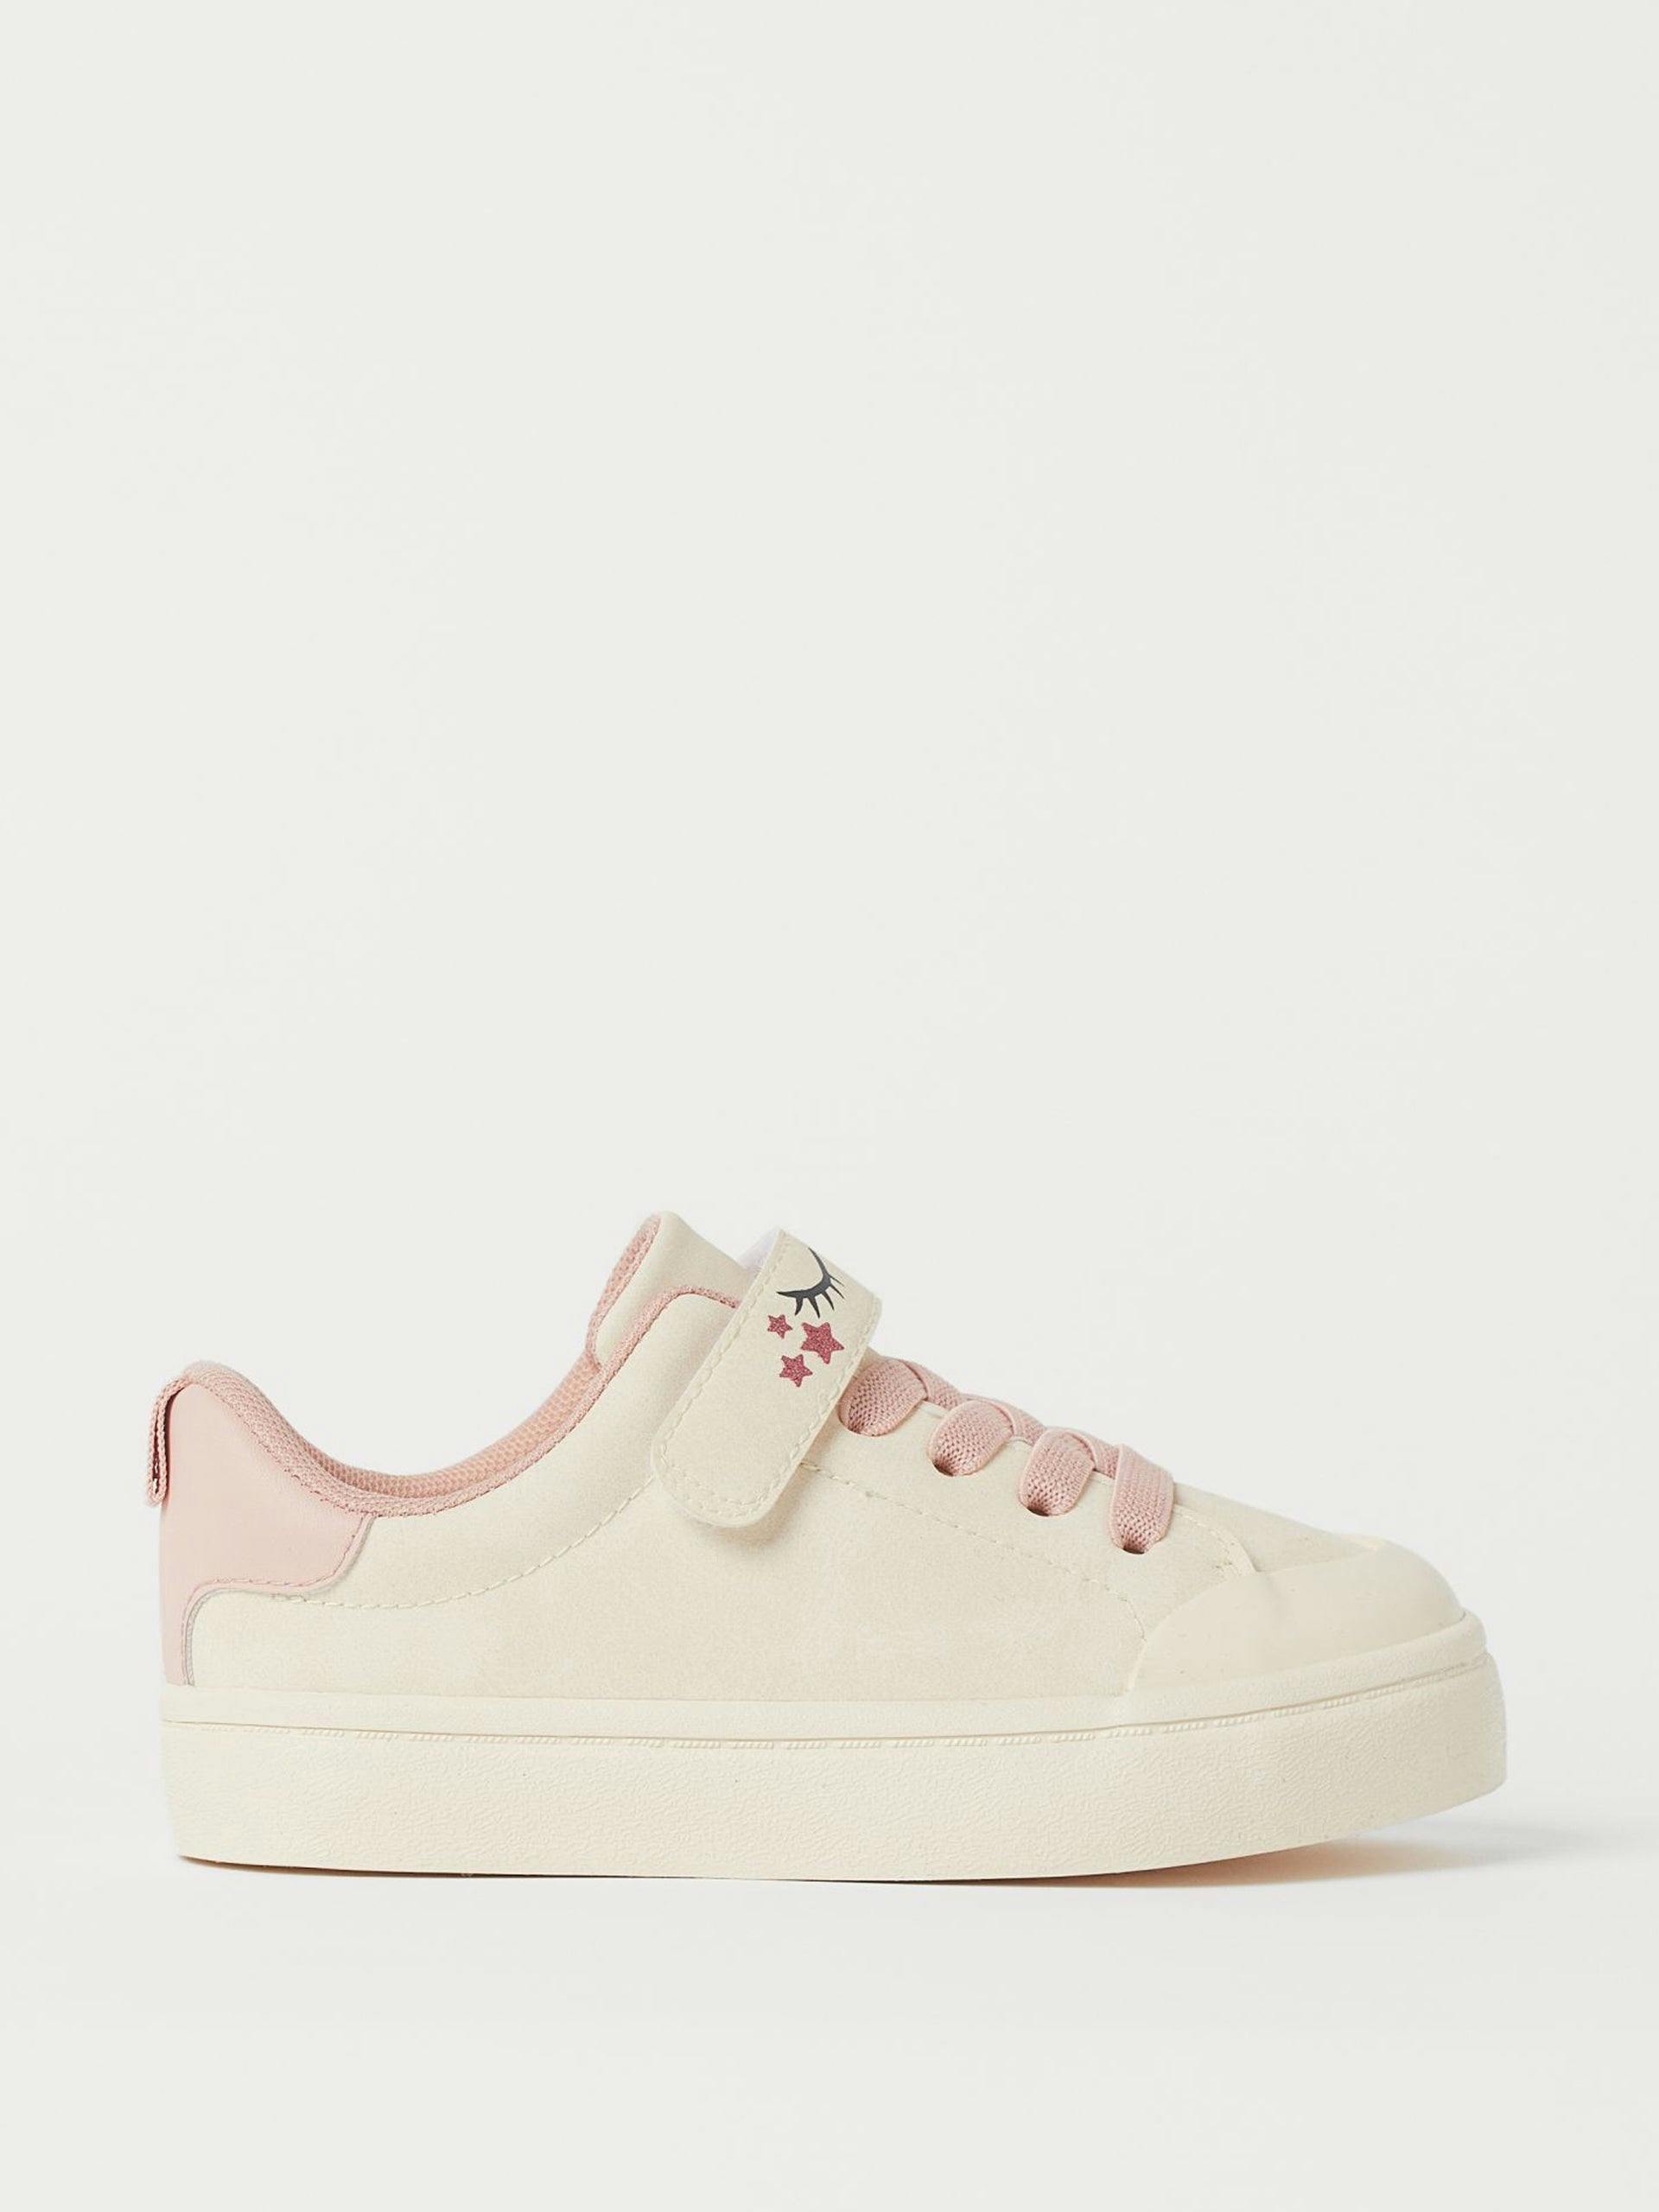 Beige and pink trainers with eyelashes